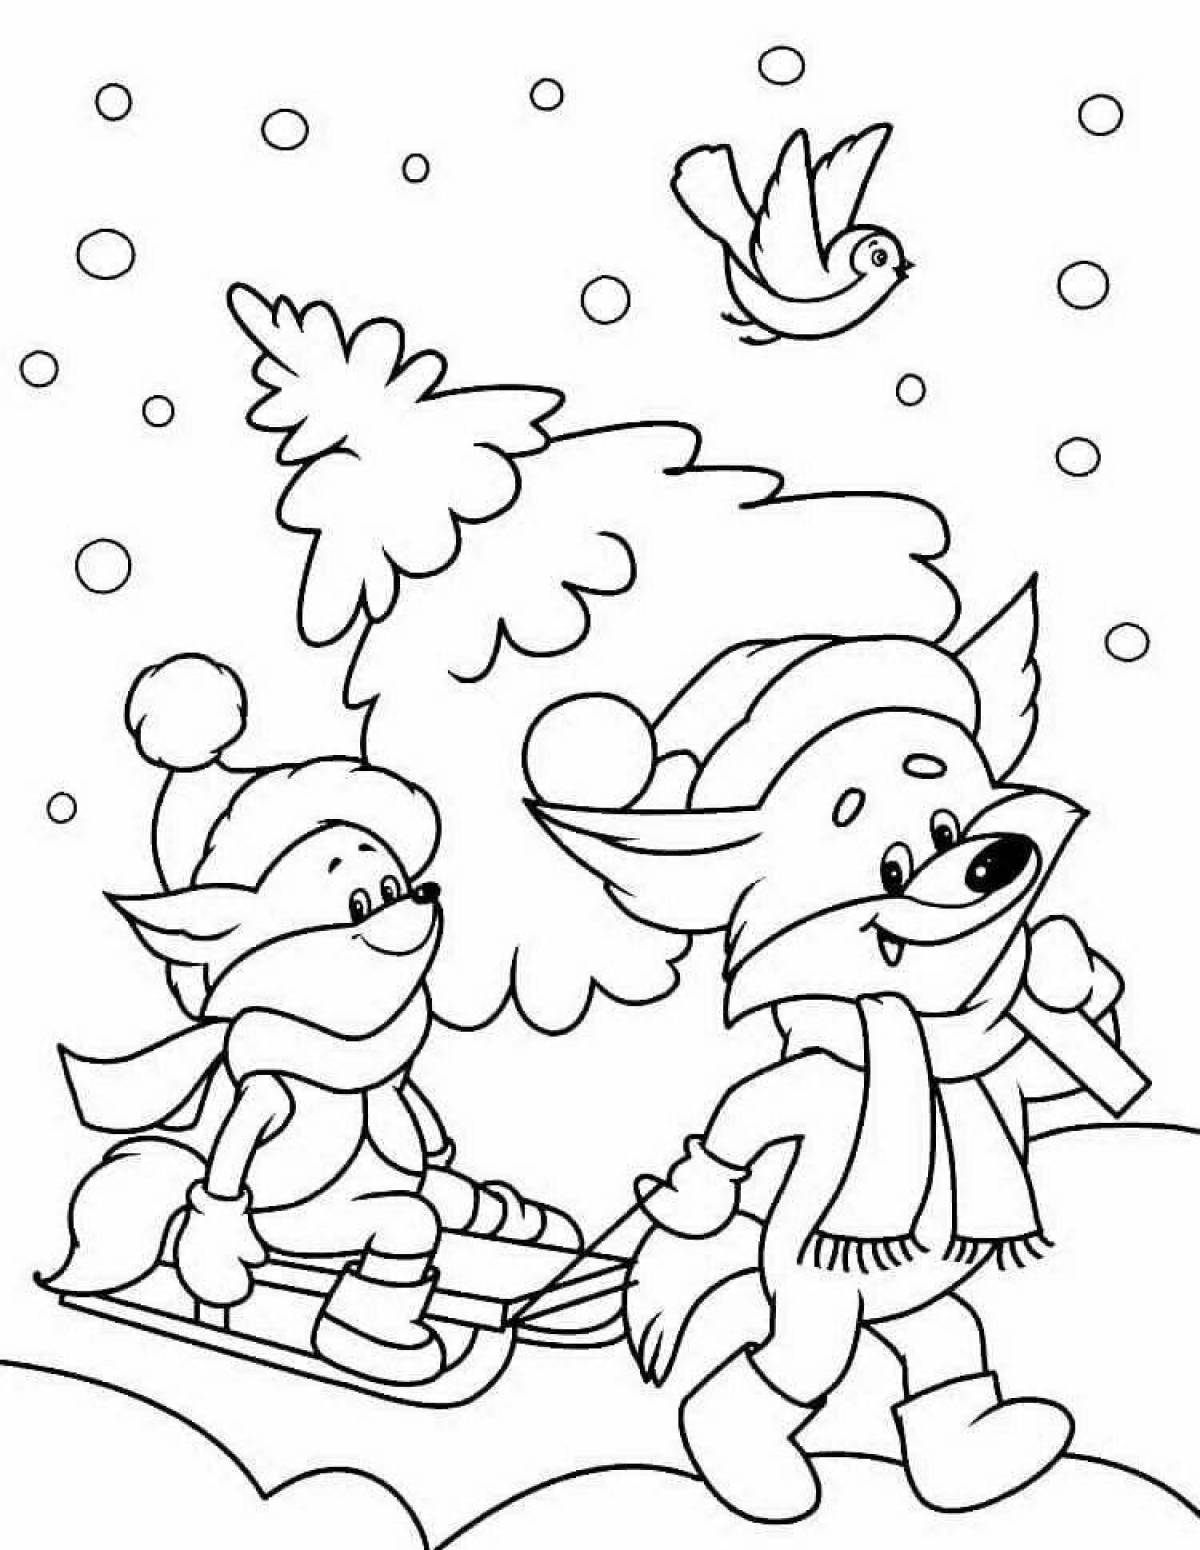 Great coloring page 3 4 years of winter